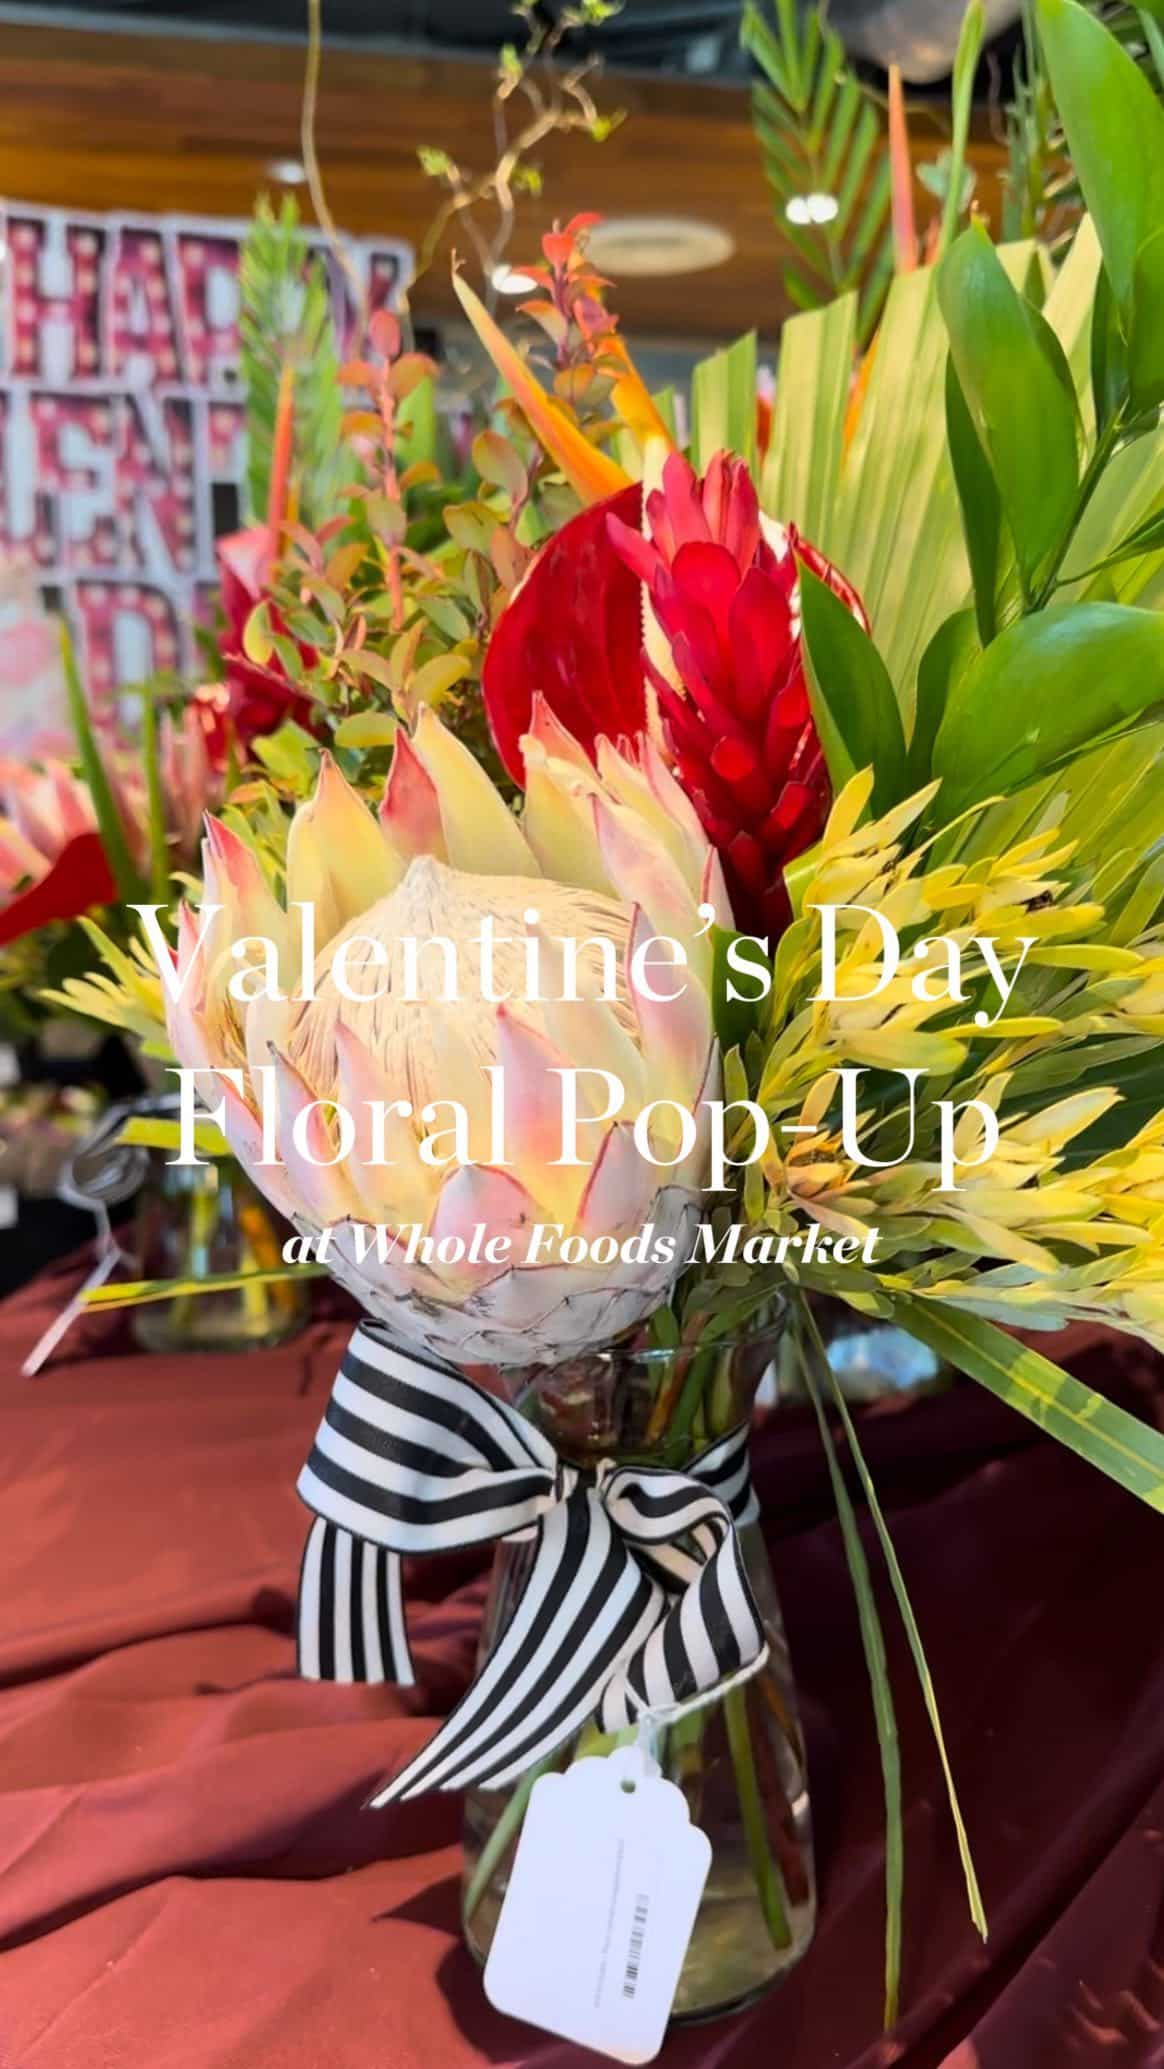 Still searching for the perfect gift? Discover something beautiful at Whole Foods Market’s floral pop-up! This one stop shop opportunity will be in bloom now through February 14 on the second floor of Whole Foods Market in Ward Village.